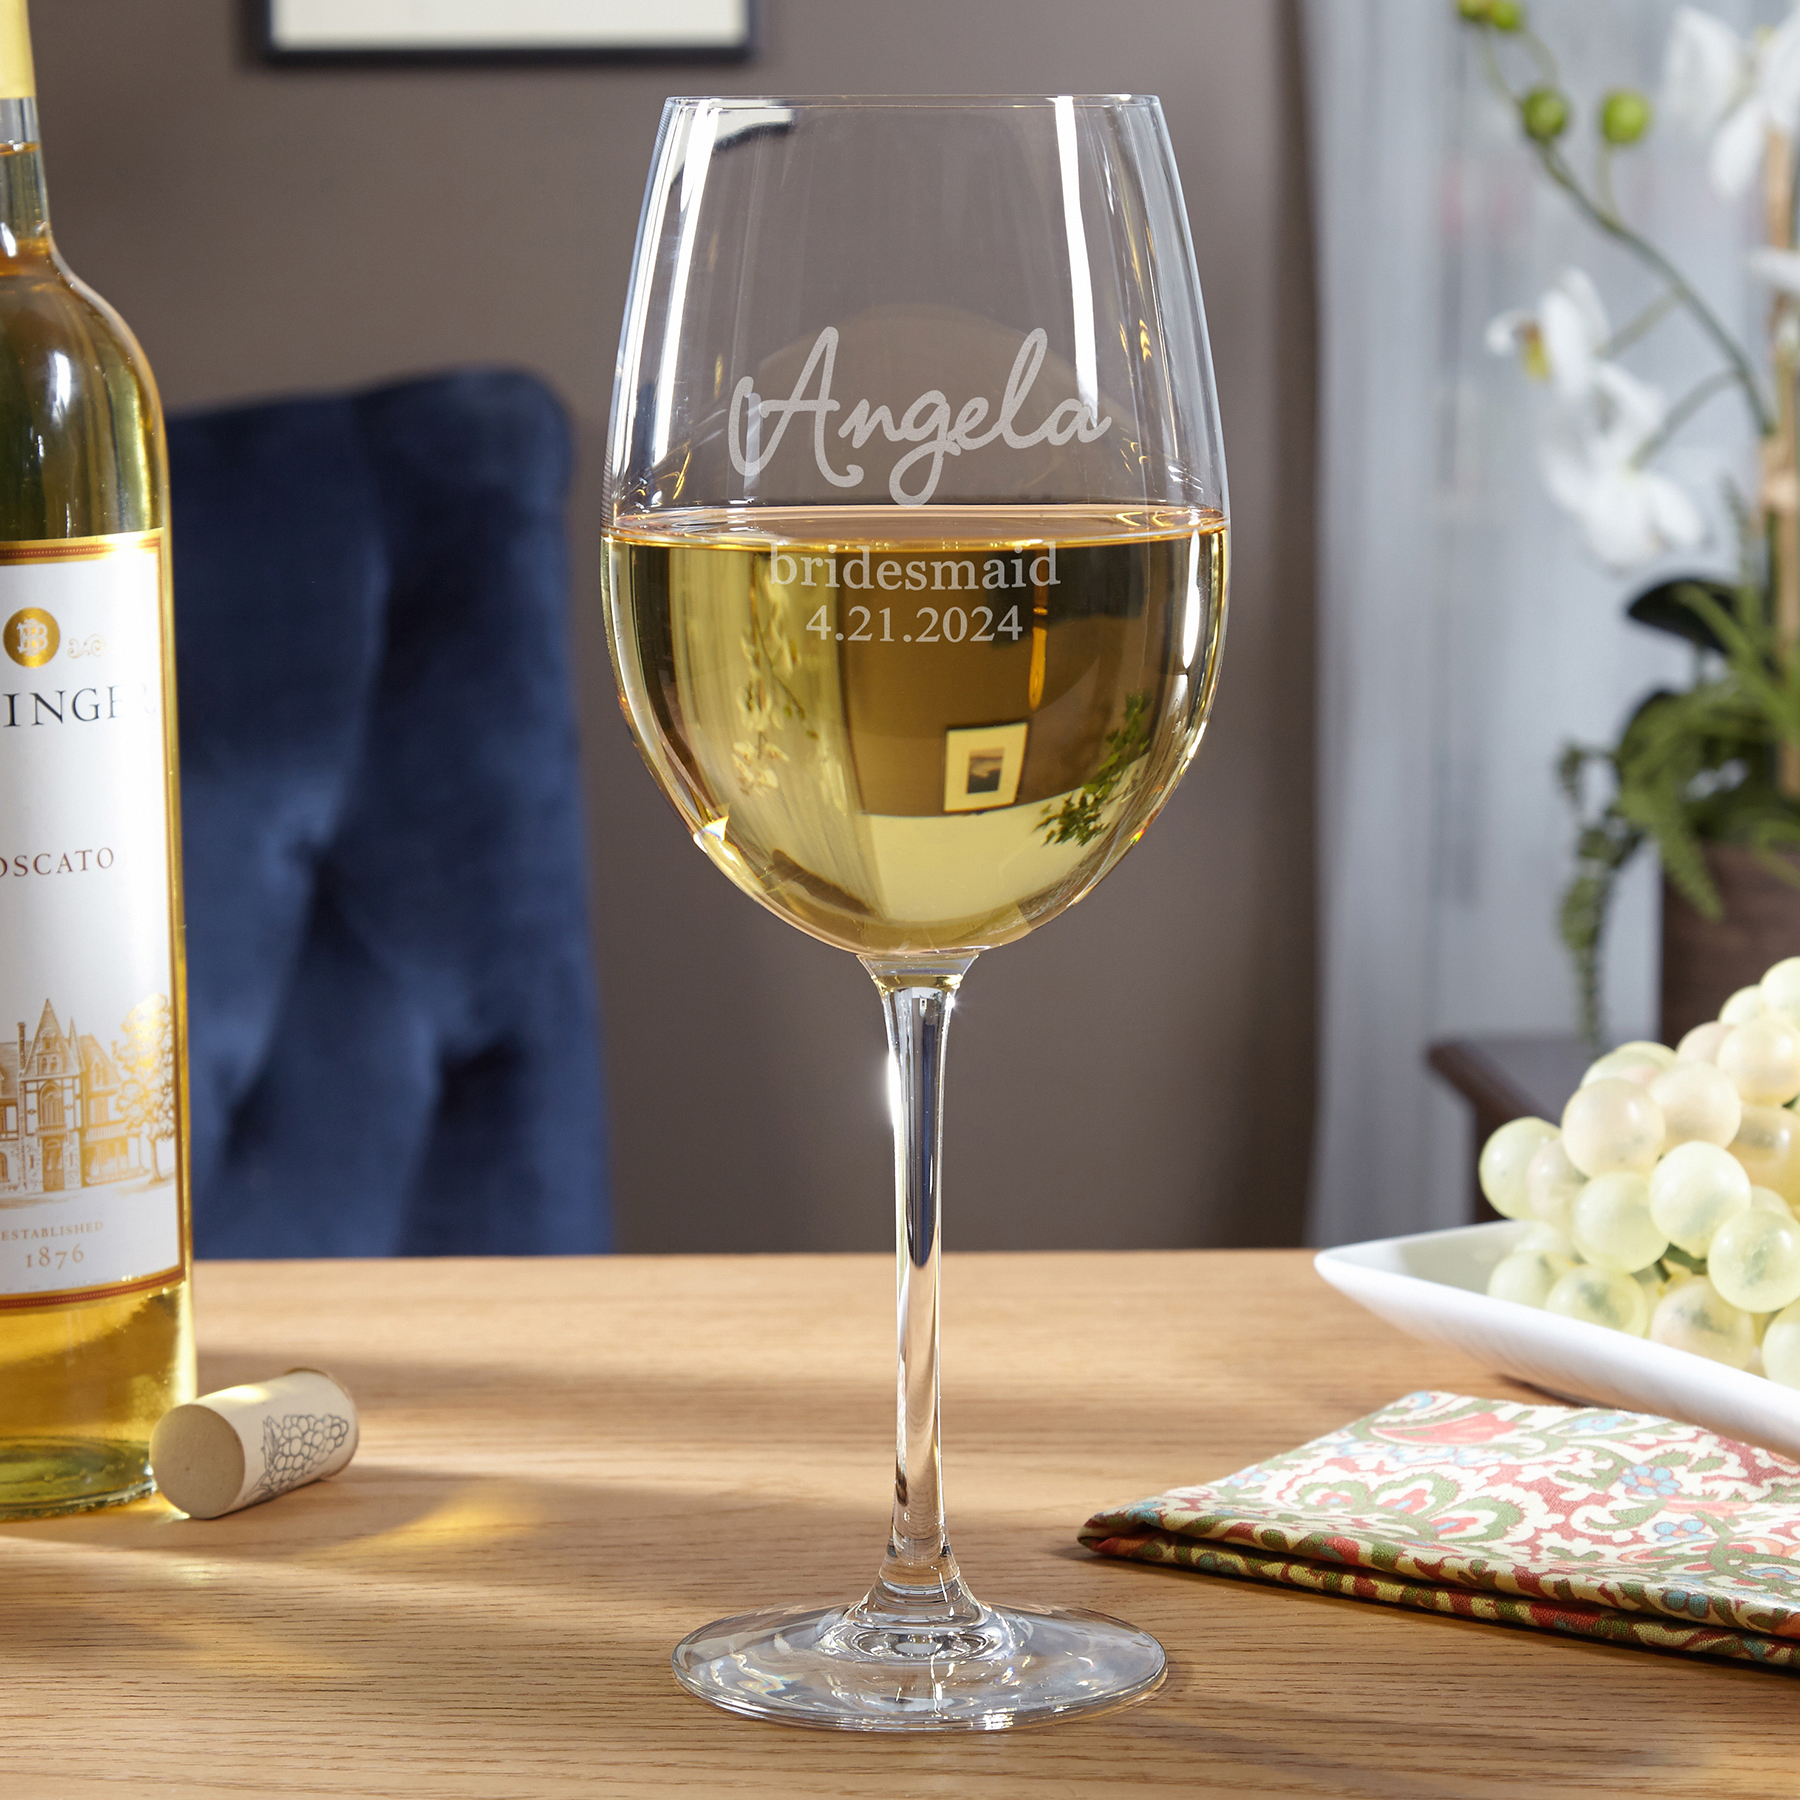 This personalized wine glass makes a great bridesmaid gift.